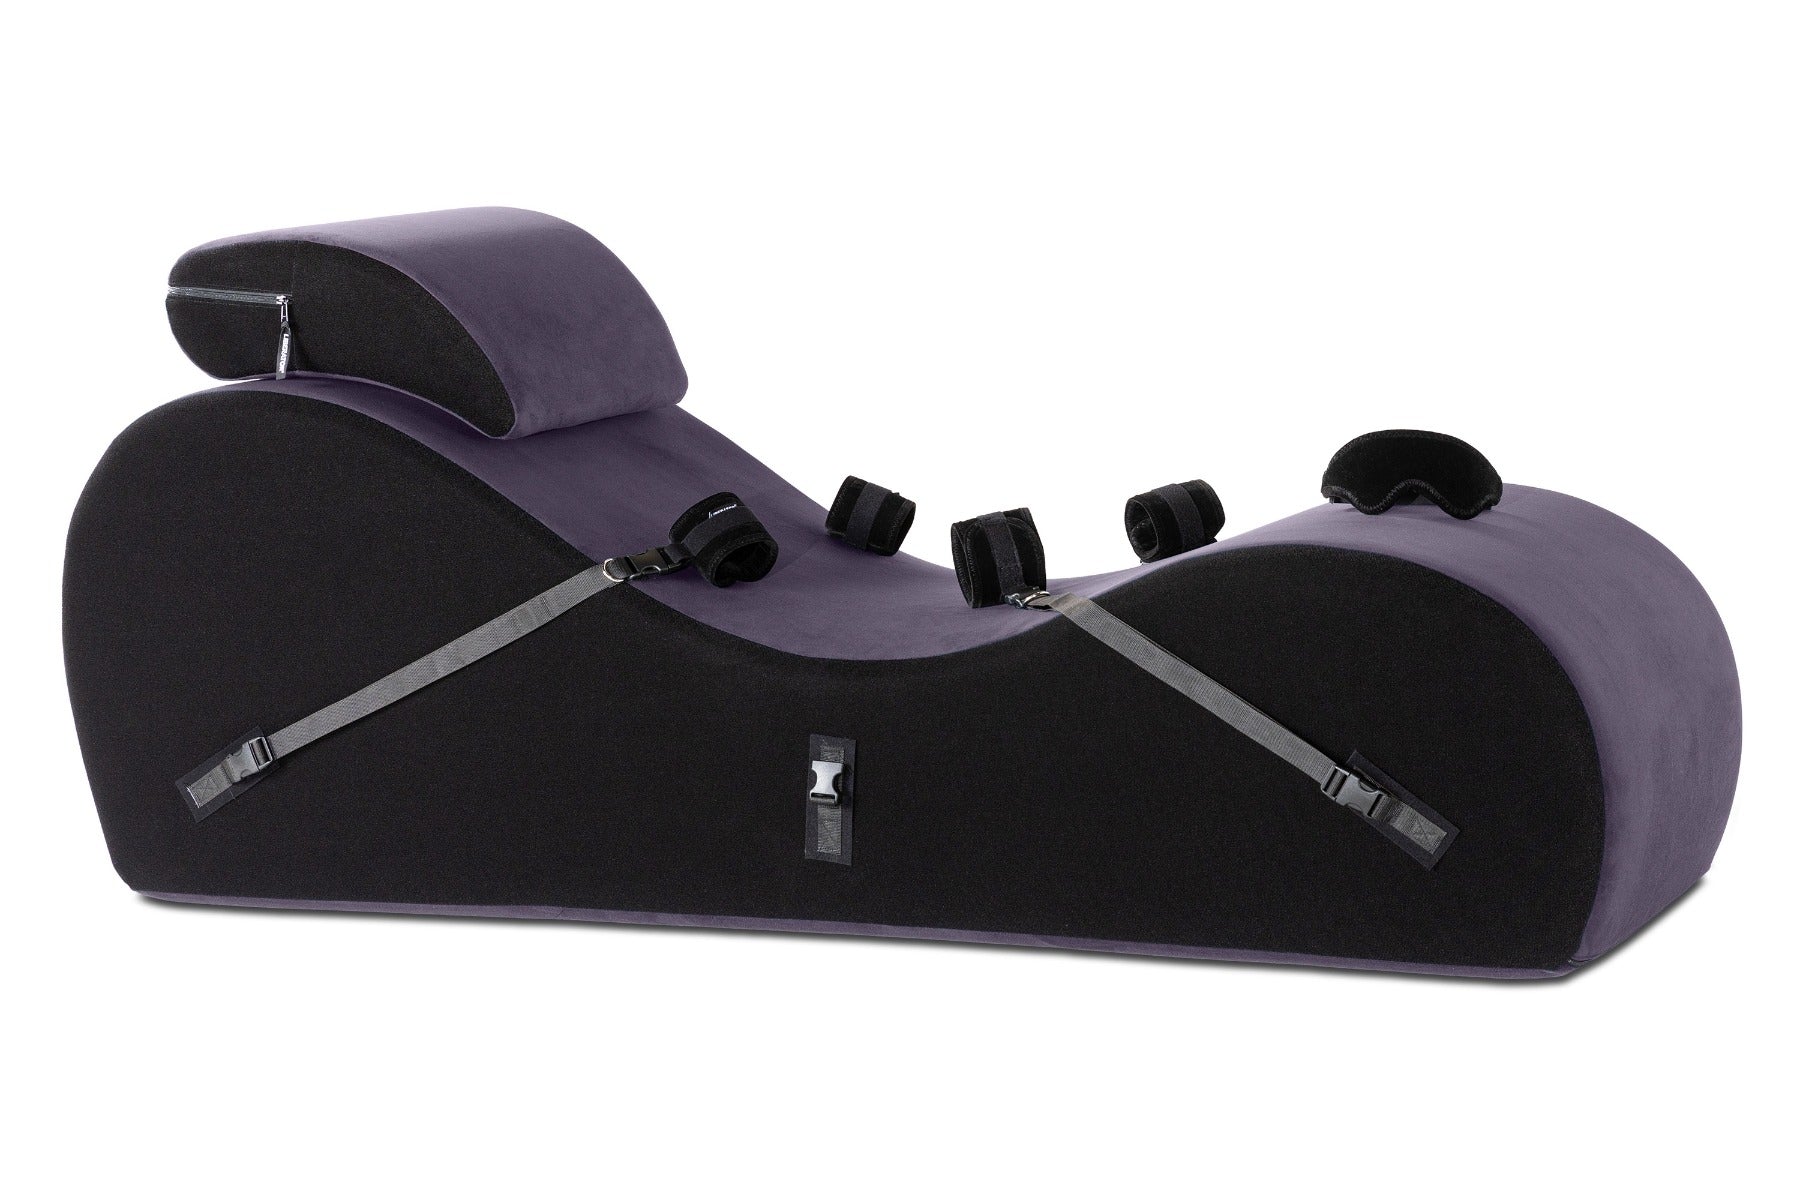 Liberator Black Label Lyza Lounger Valkyrie Edition with Cuffs